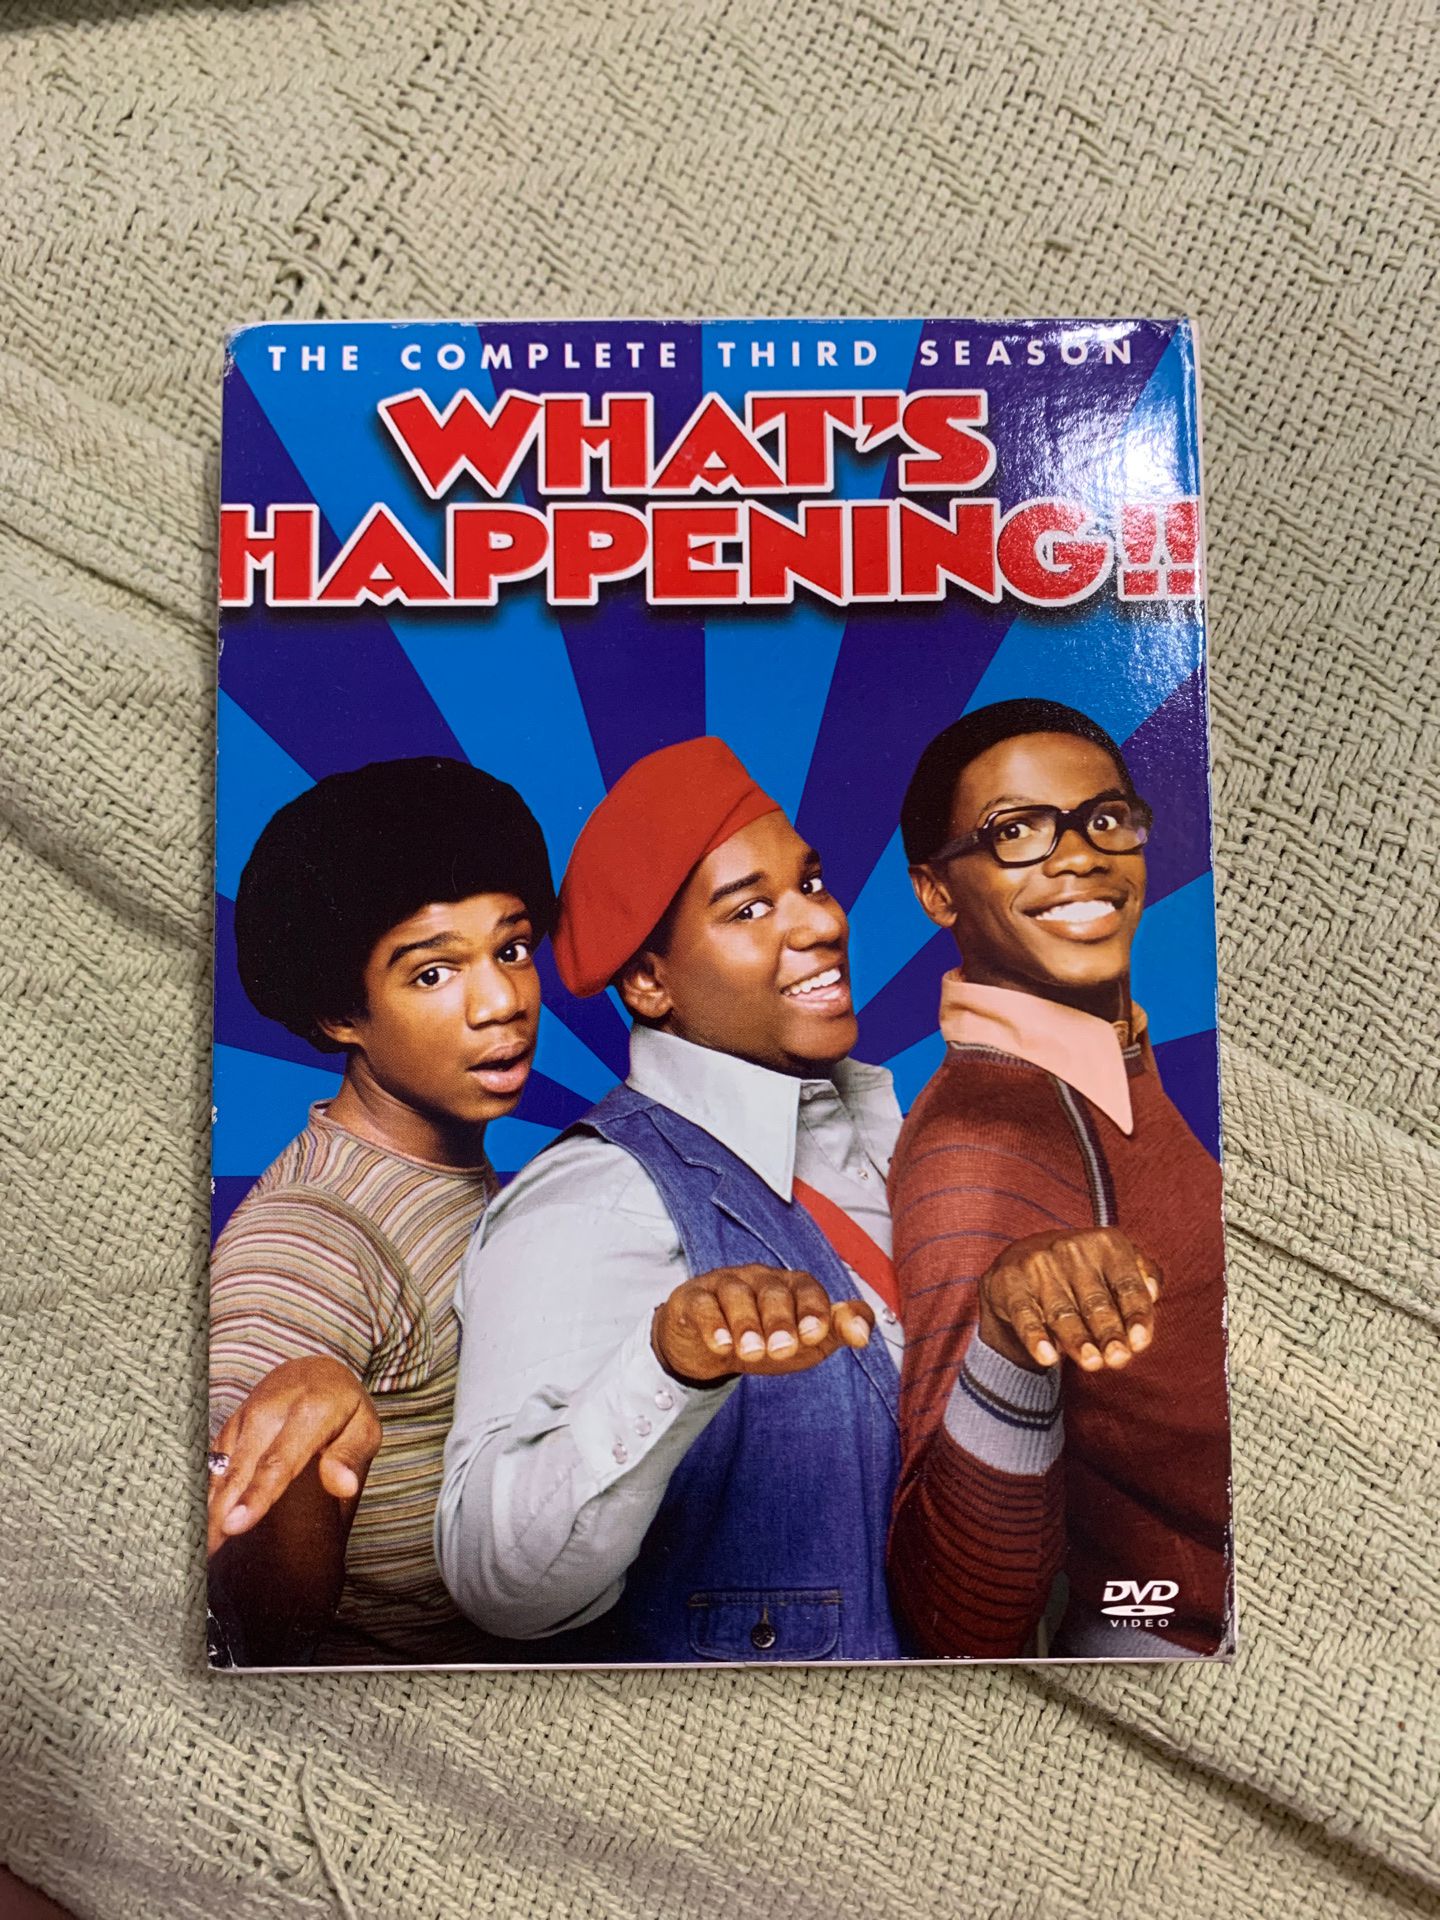 What’s happening The complete third season DVD